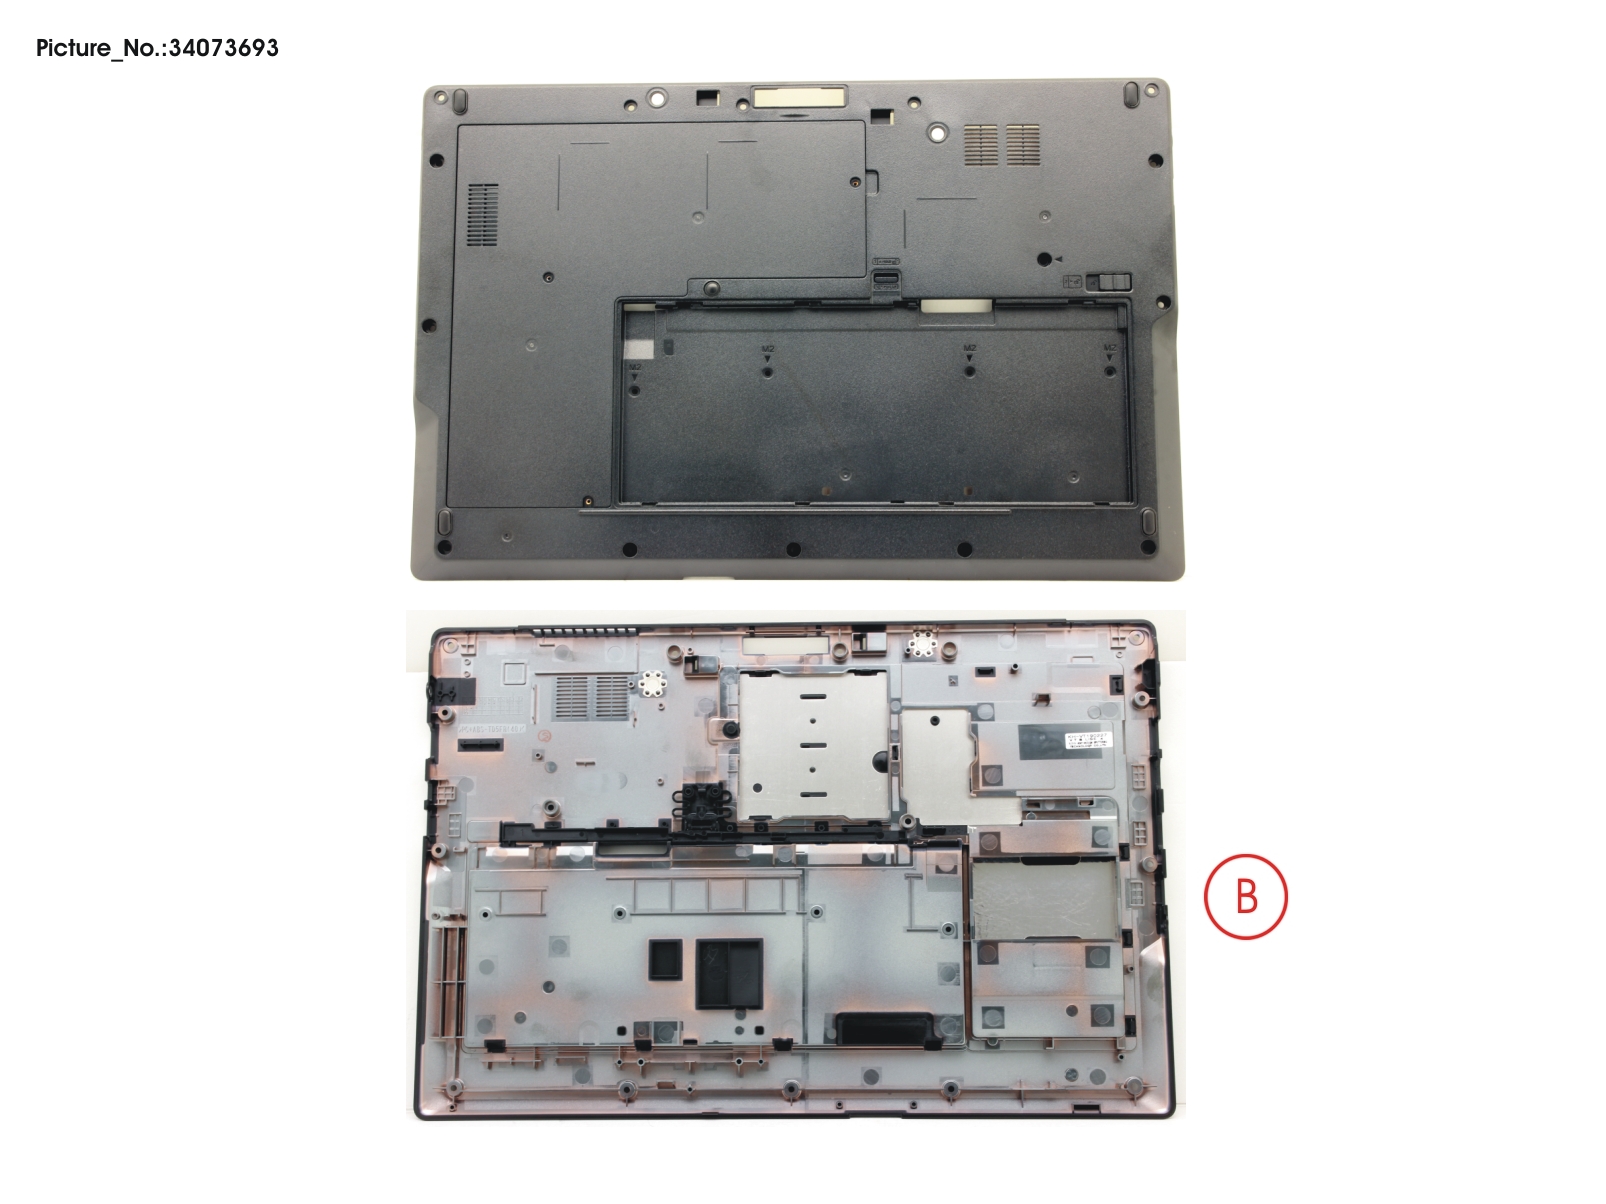 LOWER ASSY (FOR SSD M.2 MOD.)